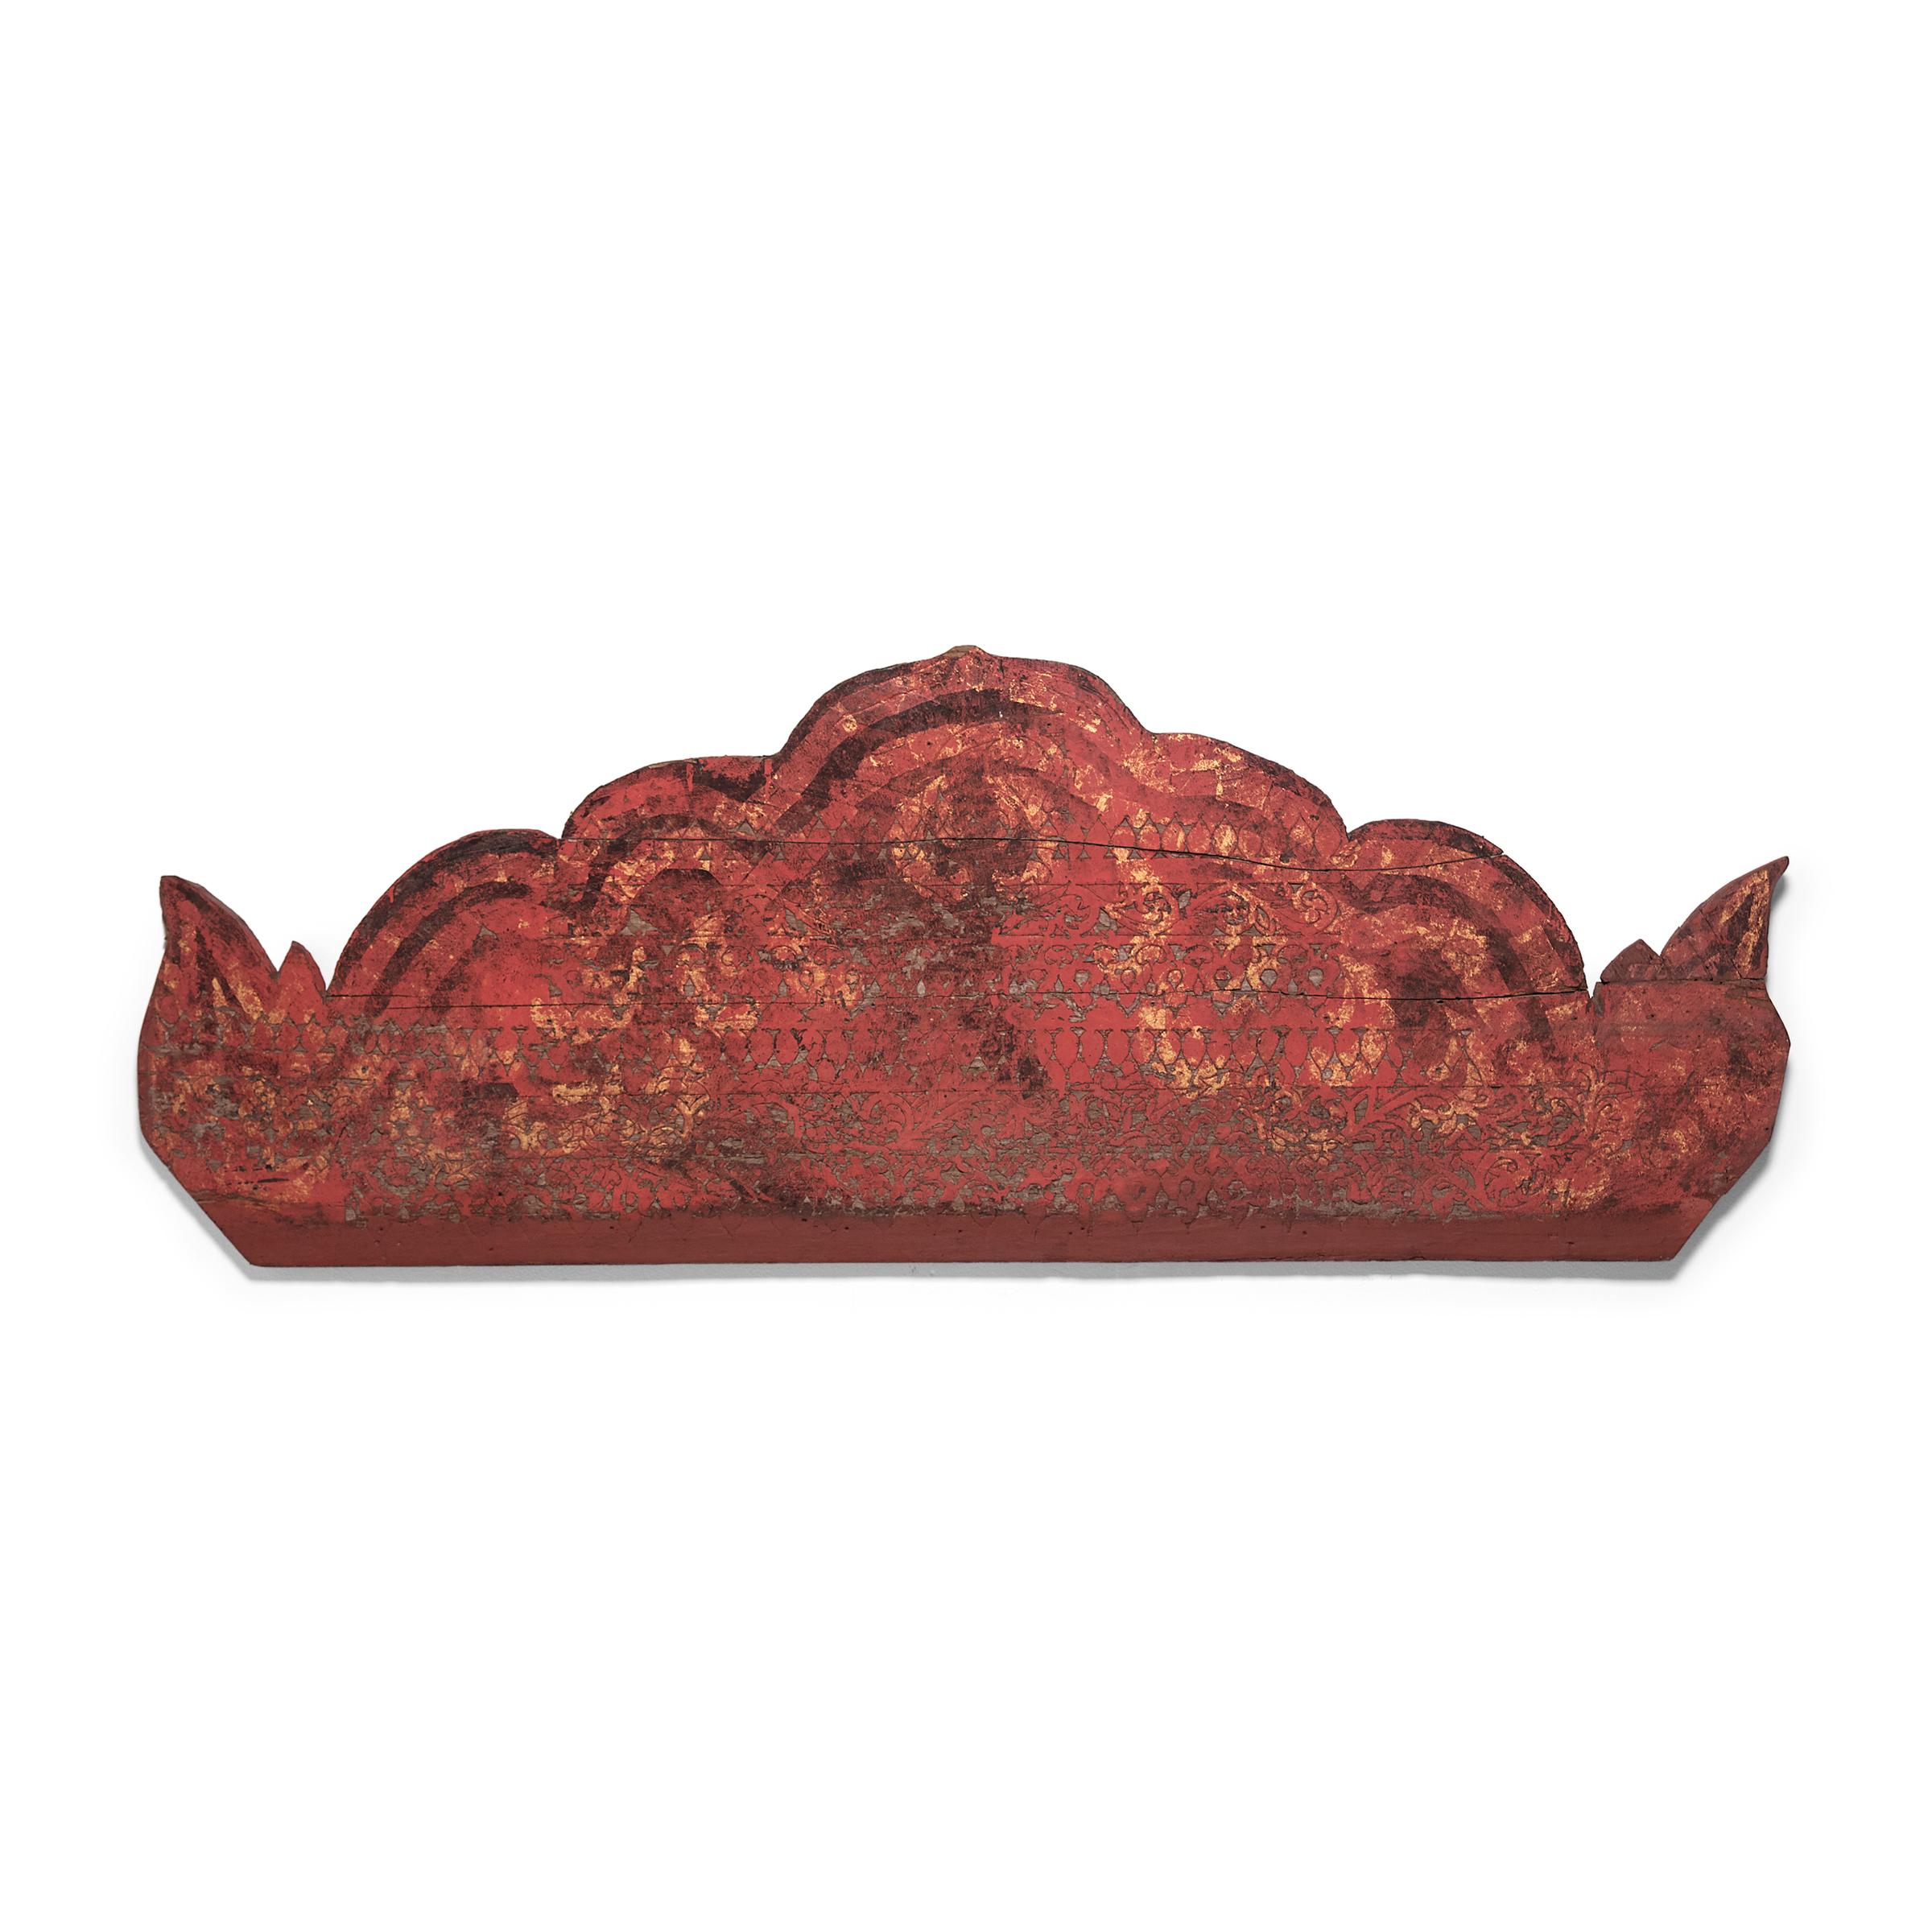 Red Lacquer Architectural Fragment, c. 1850